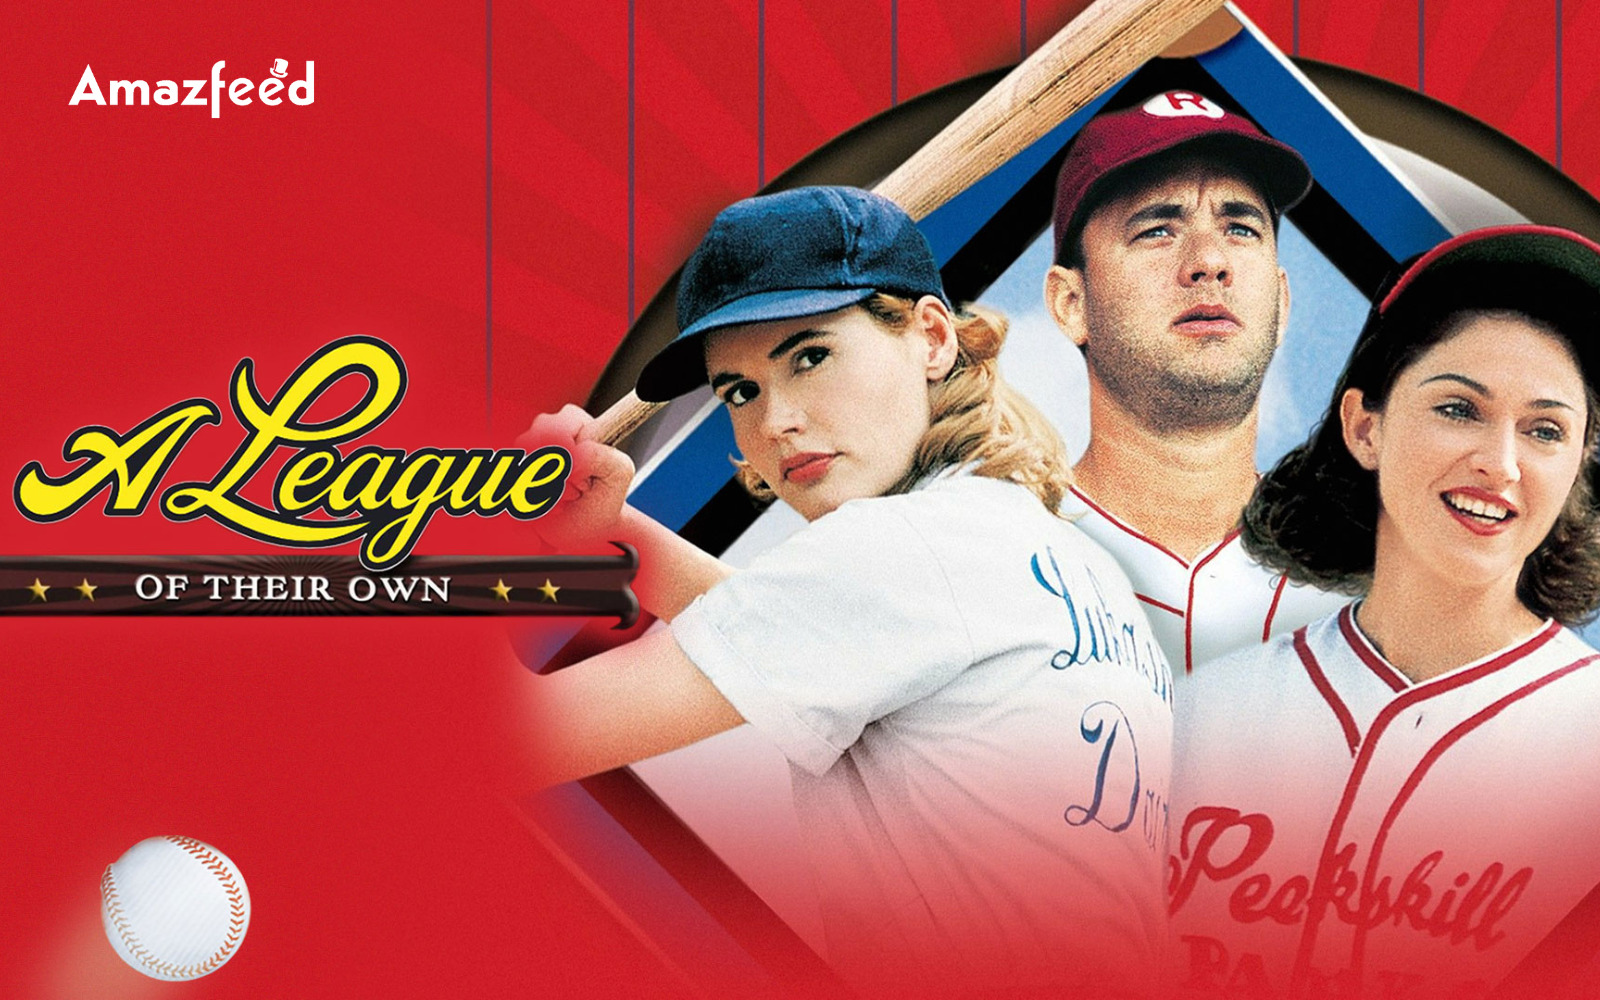 a league of their own poster